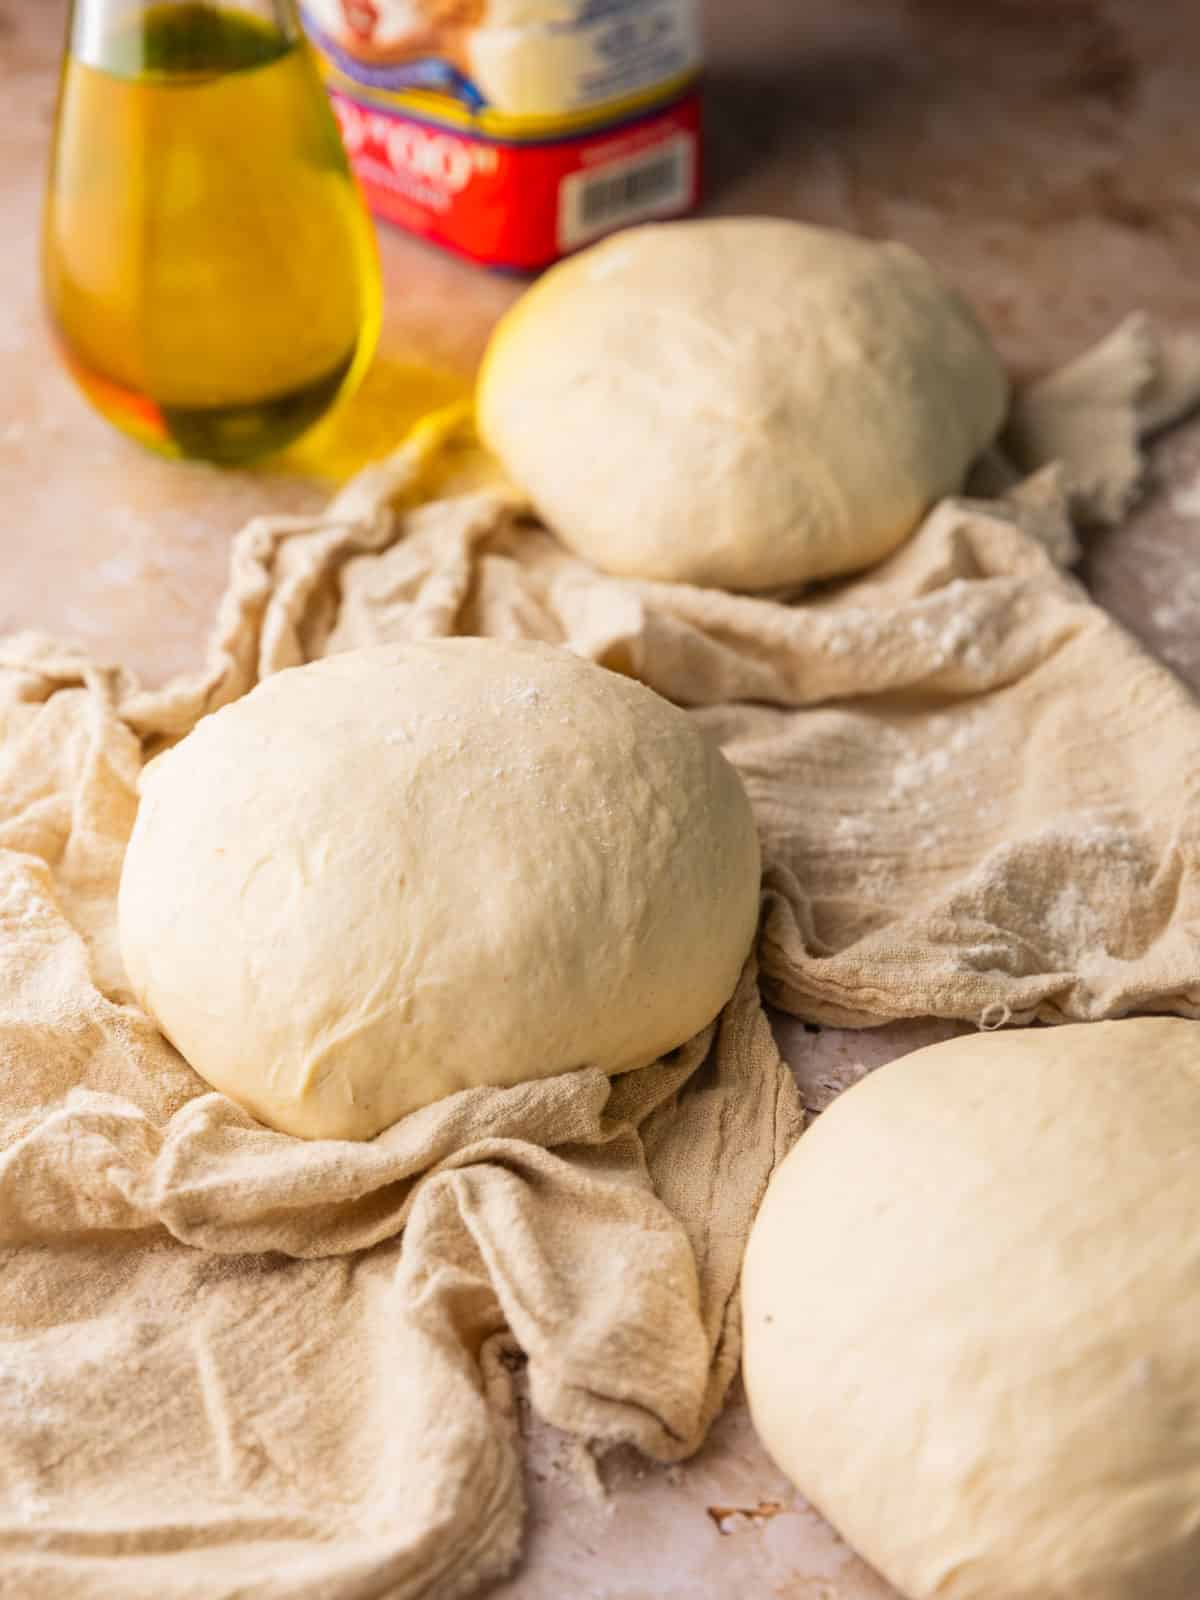 balls of pizza dough on a table with a towel with oil and flour behind them.